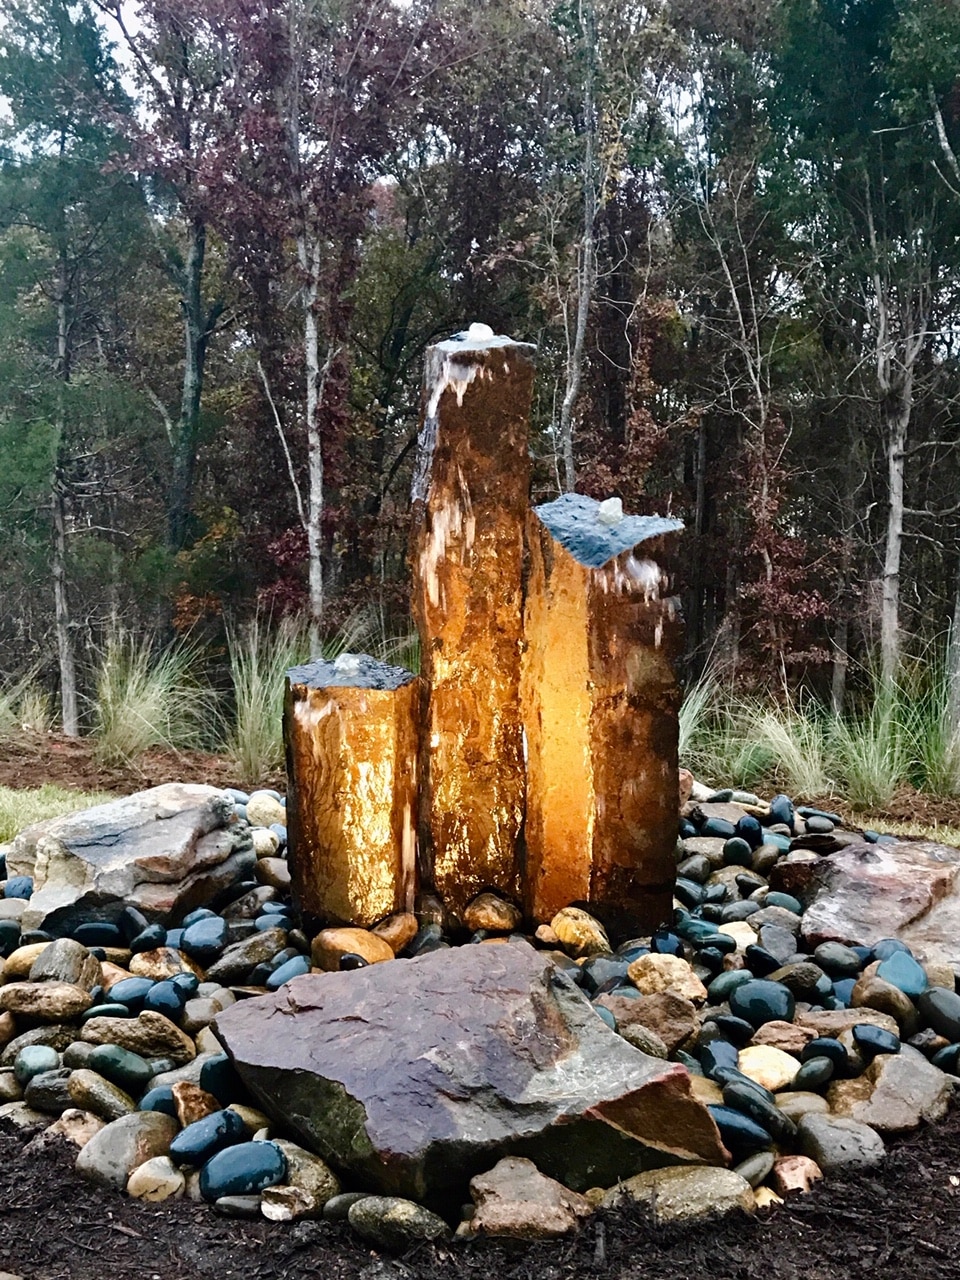 A large rock fountain in the middle of a wooded area.